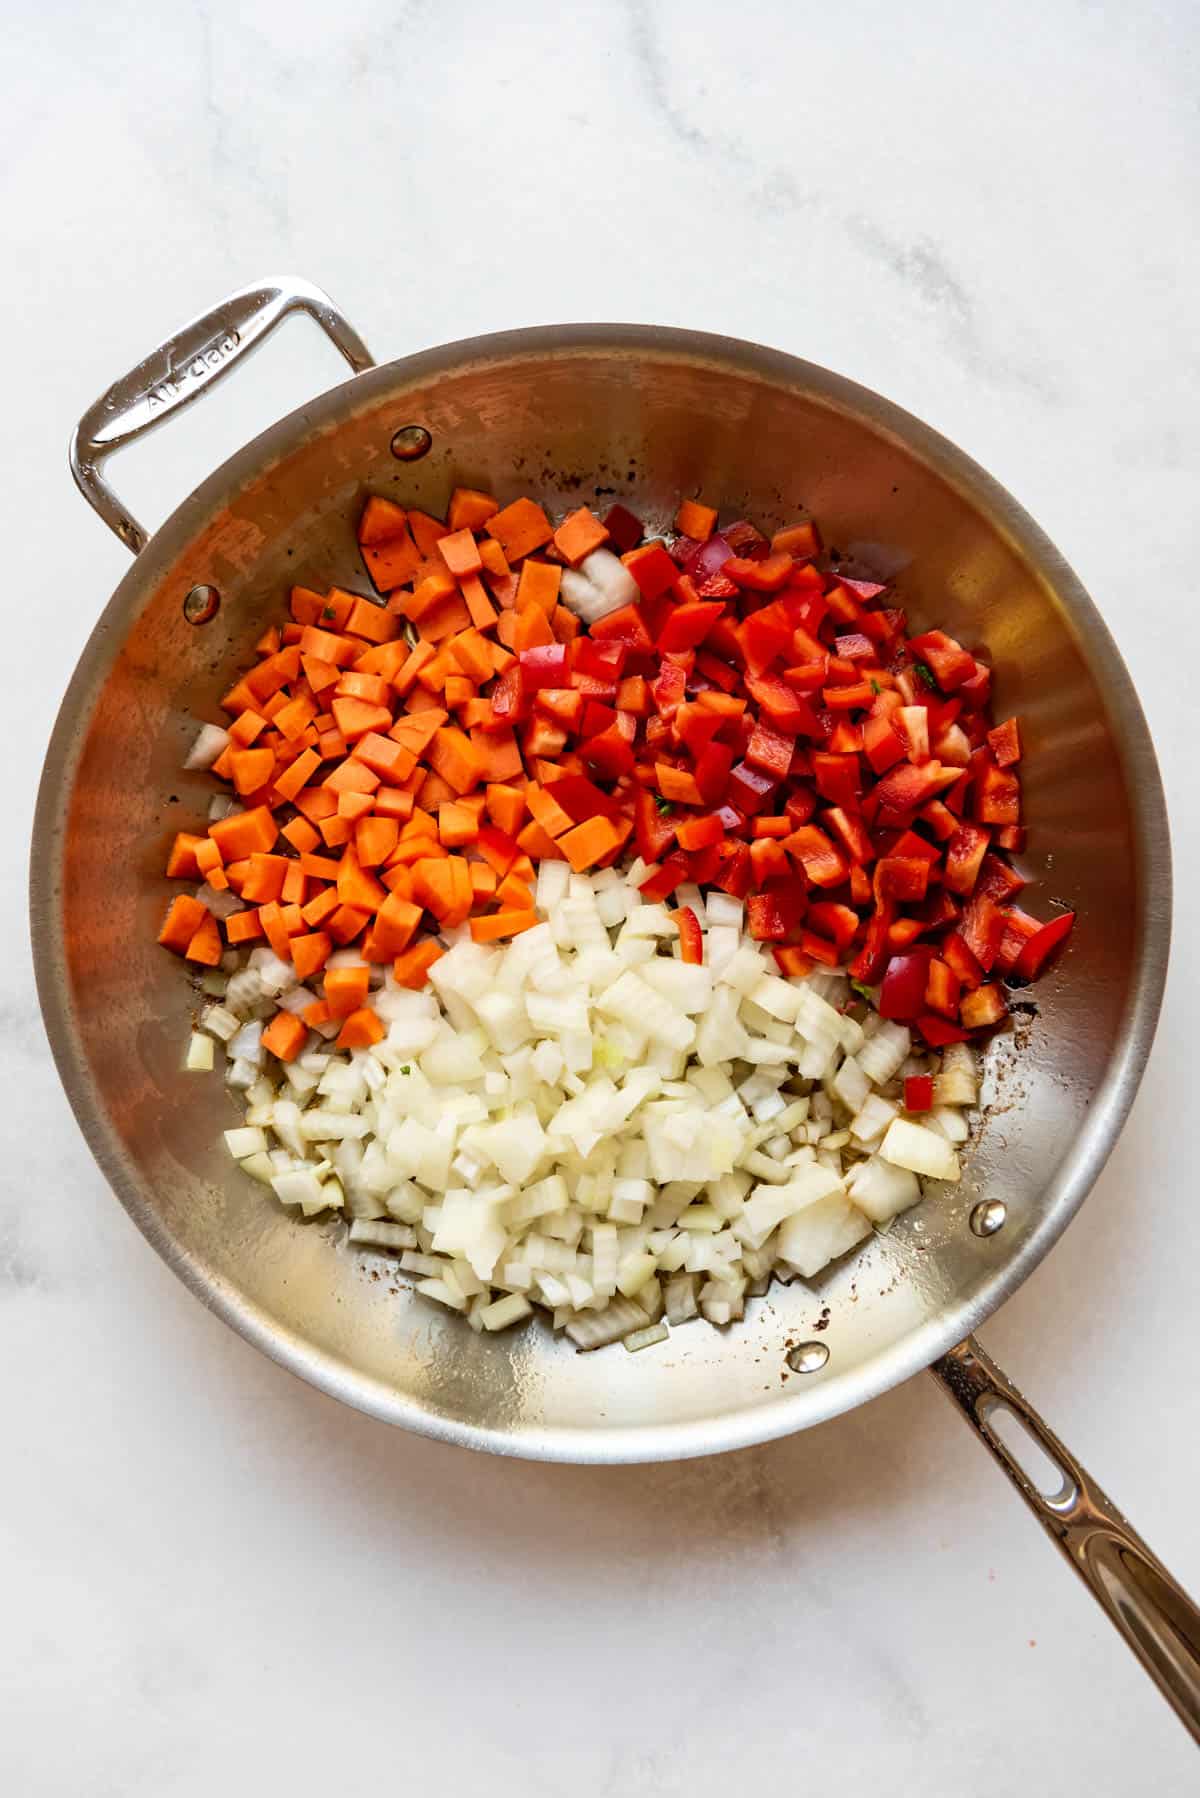 Sauteeing chopped onion, carrot, and red bell pepper in a large skillet.